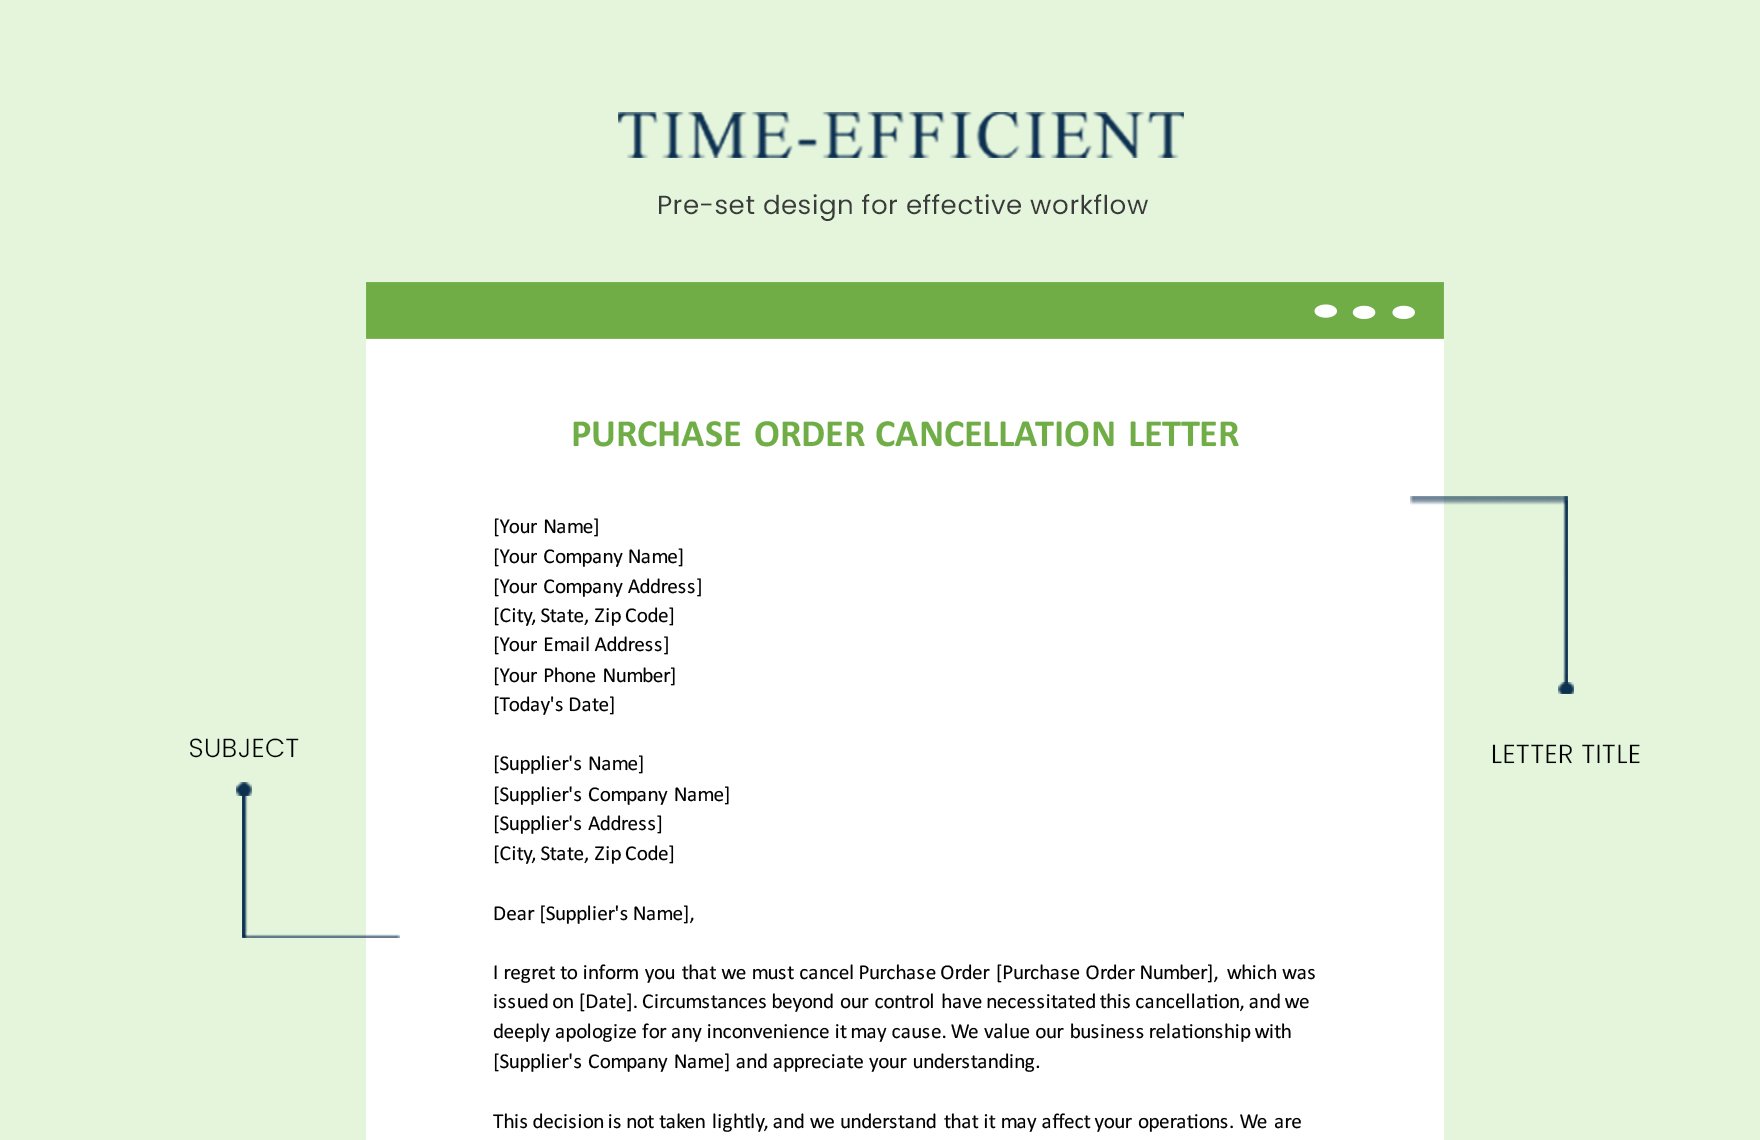 Purchase Order Cancellation Letter